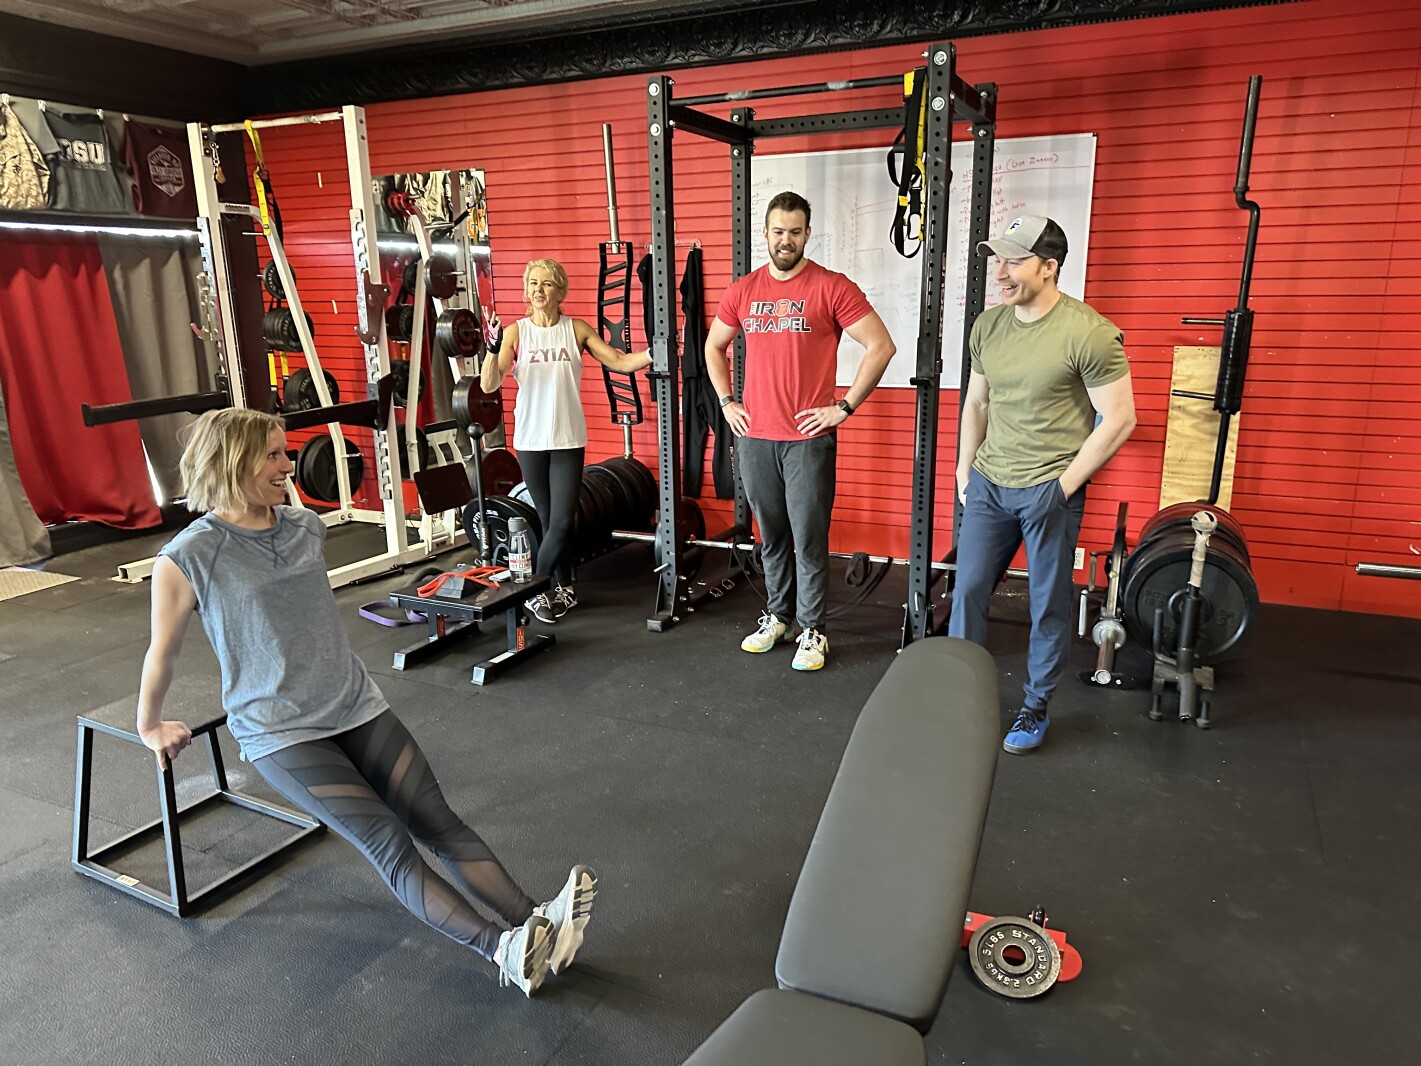 Iron Chapel Gym: More than fitness - The Dickinson Press